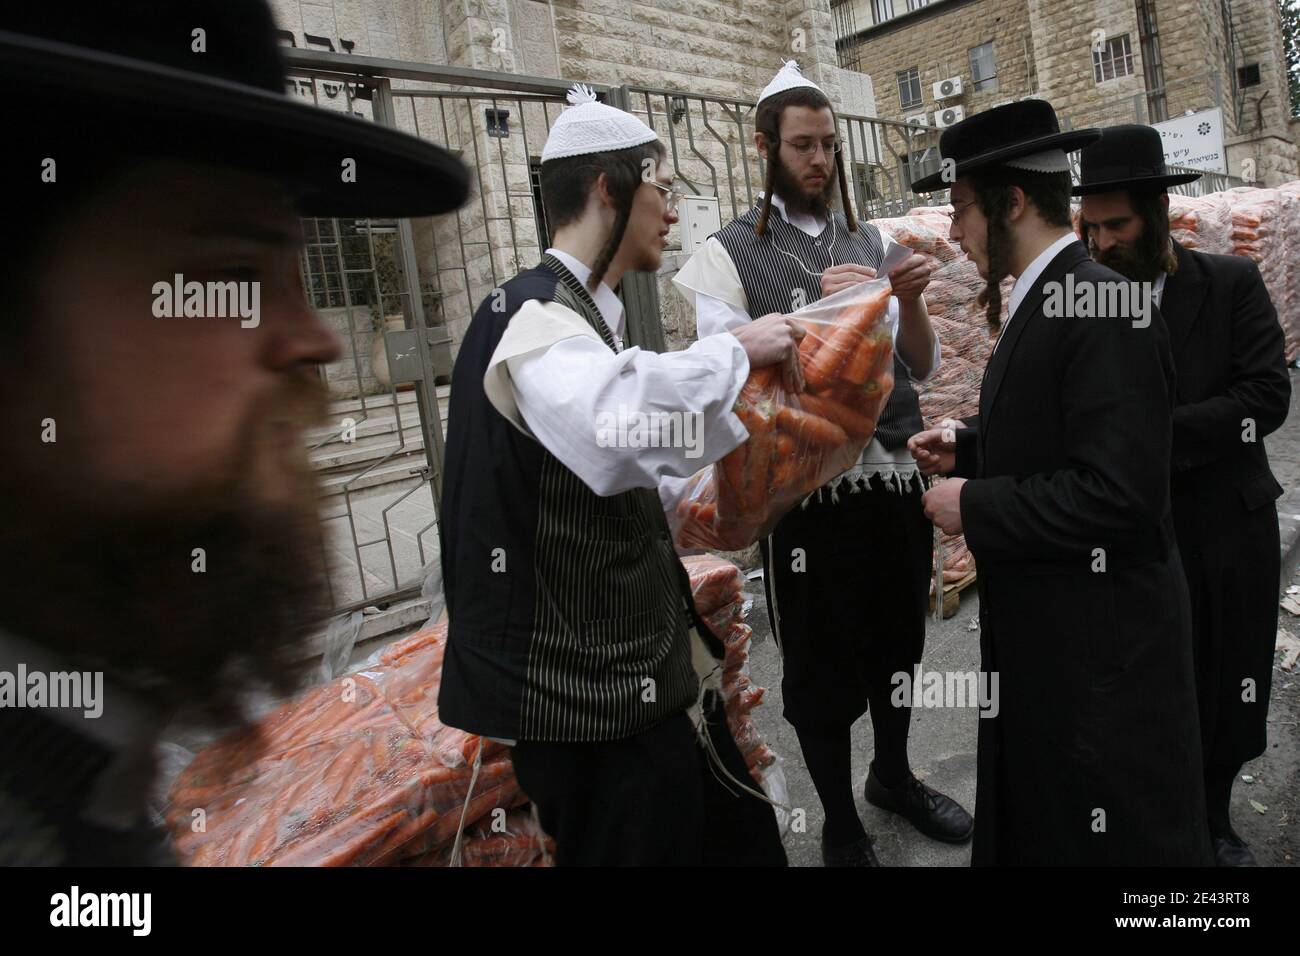 Ultra-Orthodox Jewish men carrie sacks of food for distribution to the needy, for the upcoming Jewish holiday of Passover, in the Mea Shearim neighbourhood of Jerusalem, Israel on April 6, 2009. Passover commemorates the flight of Jews from Ancient Egypt as described in Exodus. According to the account, the Jews did not have time to prepare leavened bread before fleeing to the Promised Land. Photo by Olivier Fitoussi/ABACAPRESS.COM Stock Photo